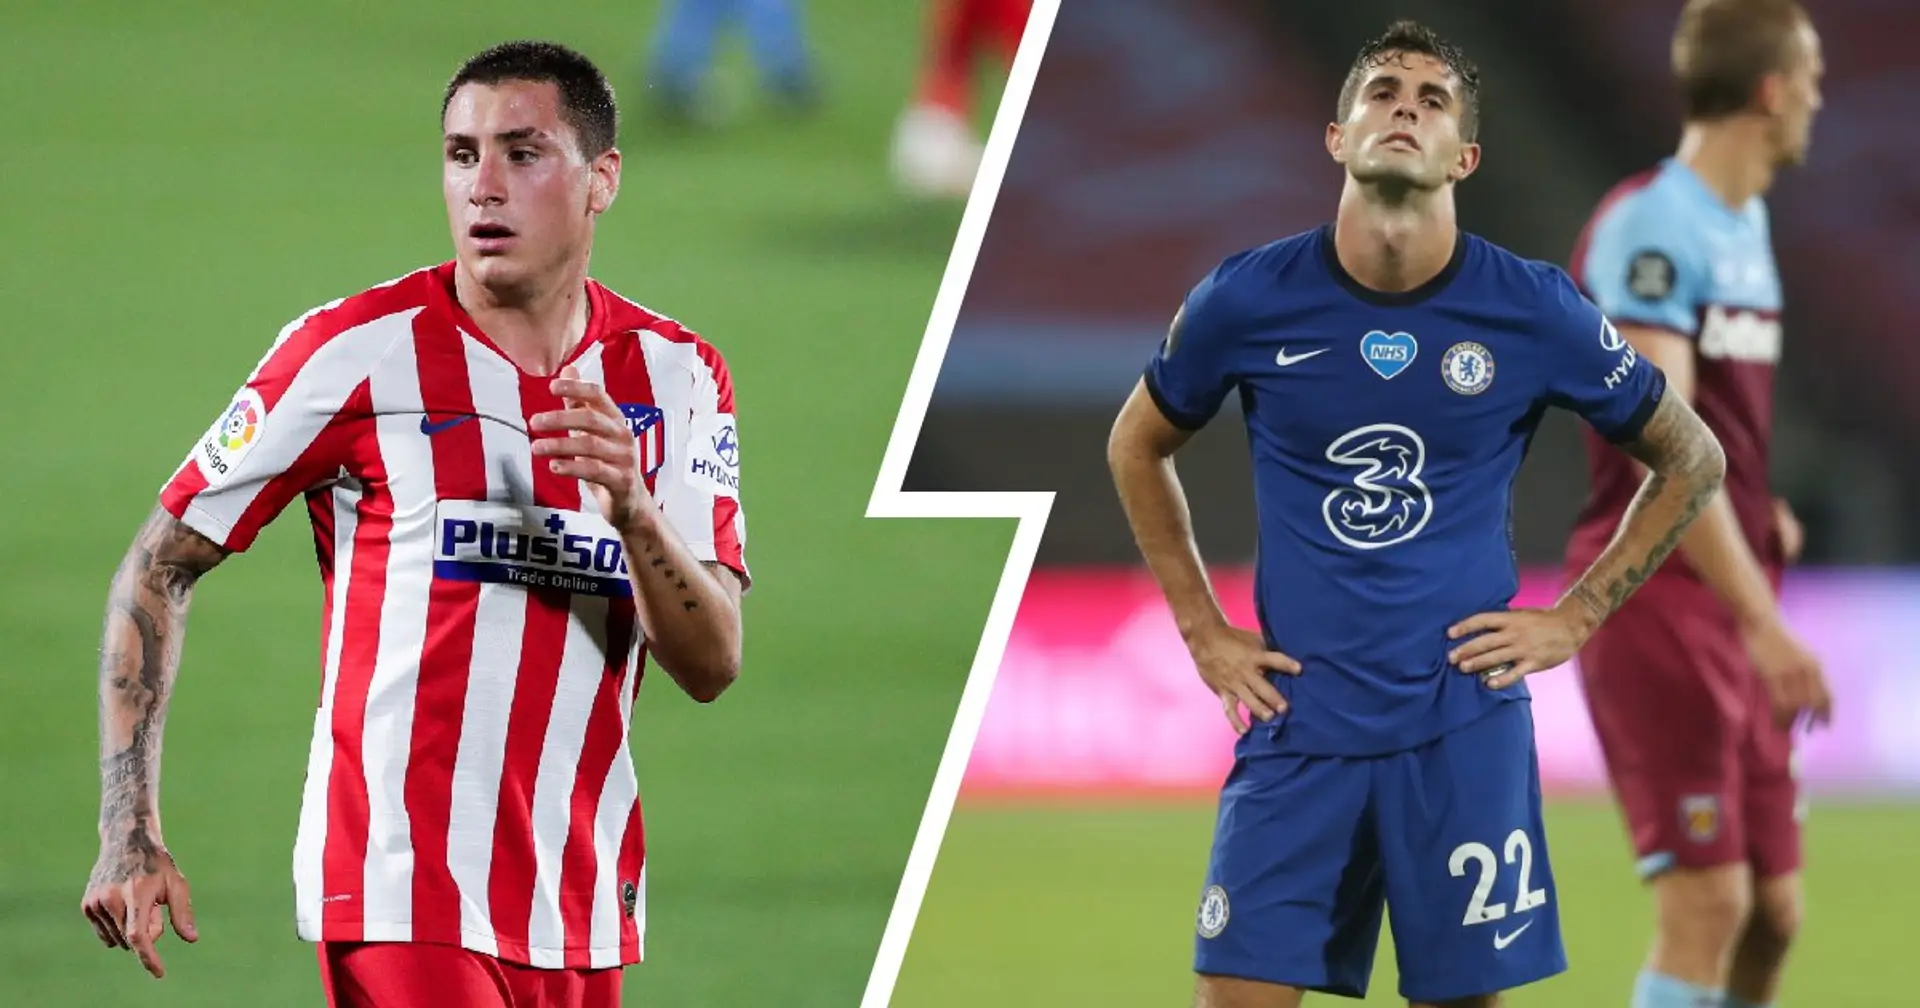 Blues interested in 'dream' Gimenez signing & 5 more stories at Chelsea you might have missed